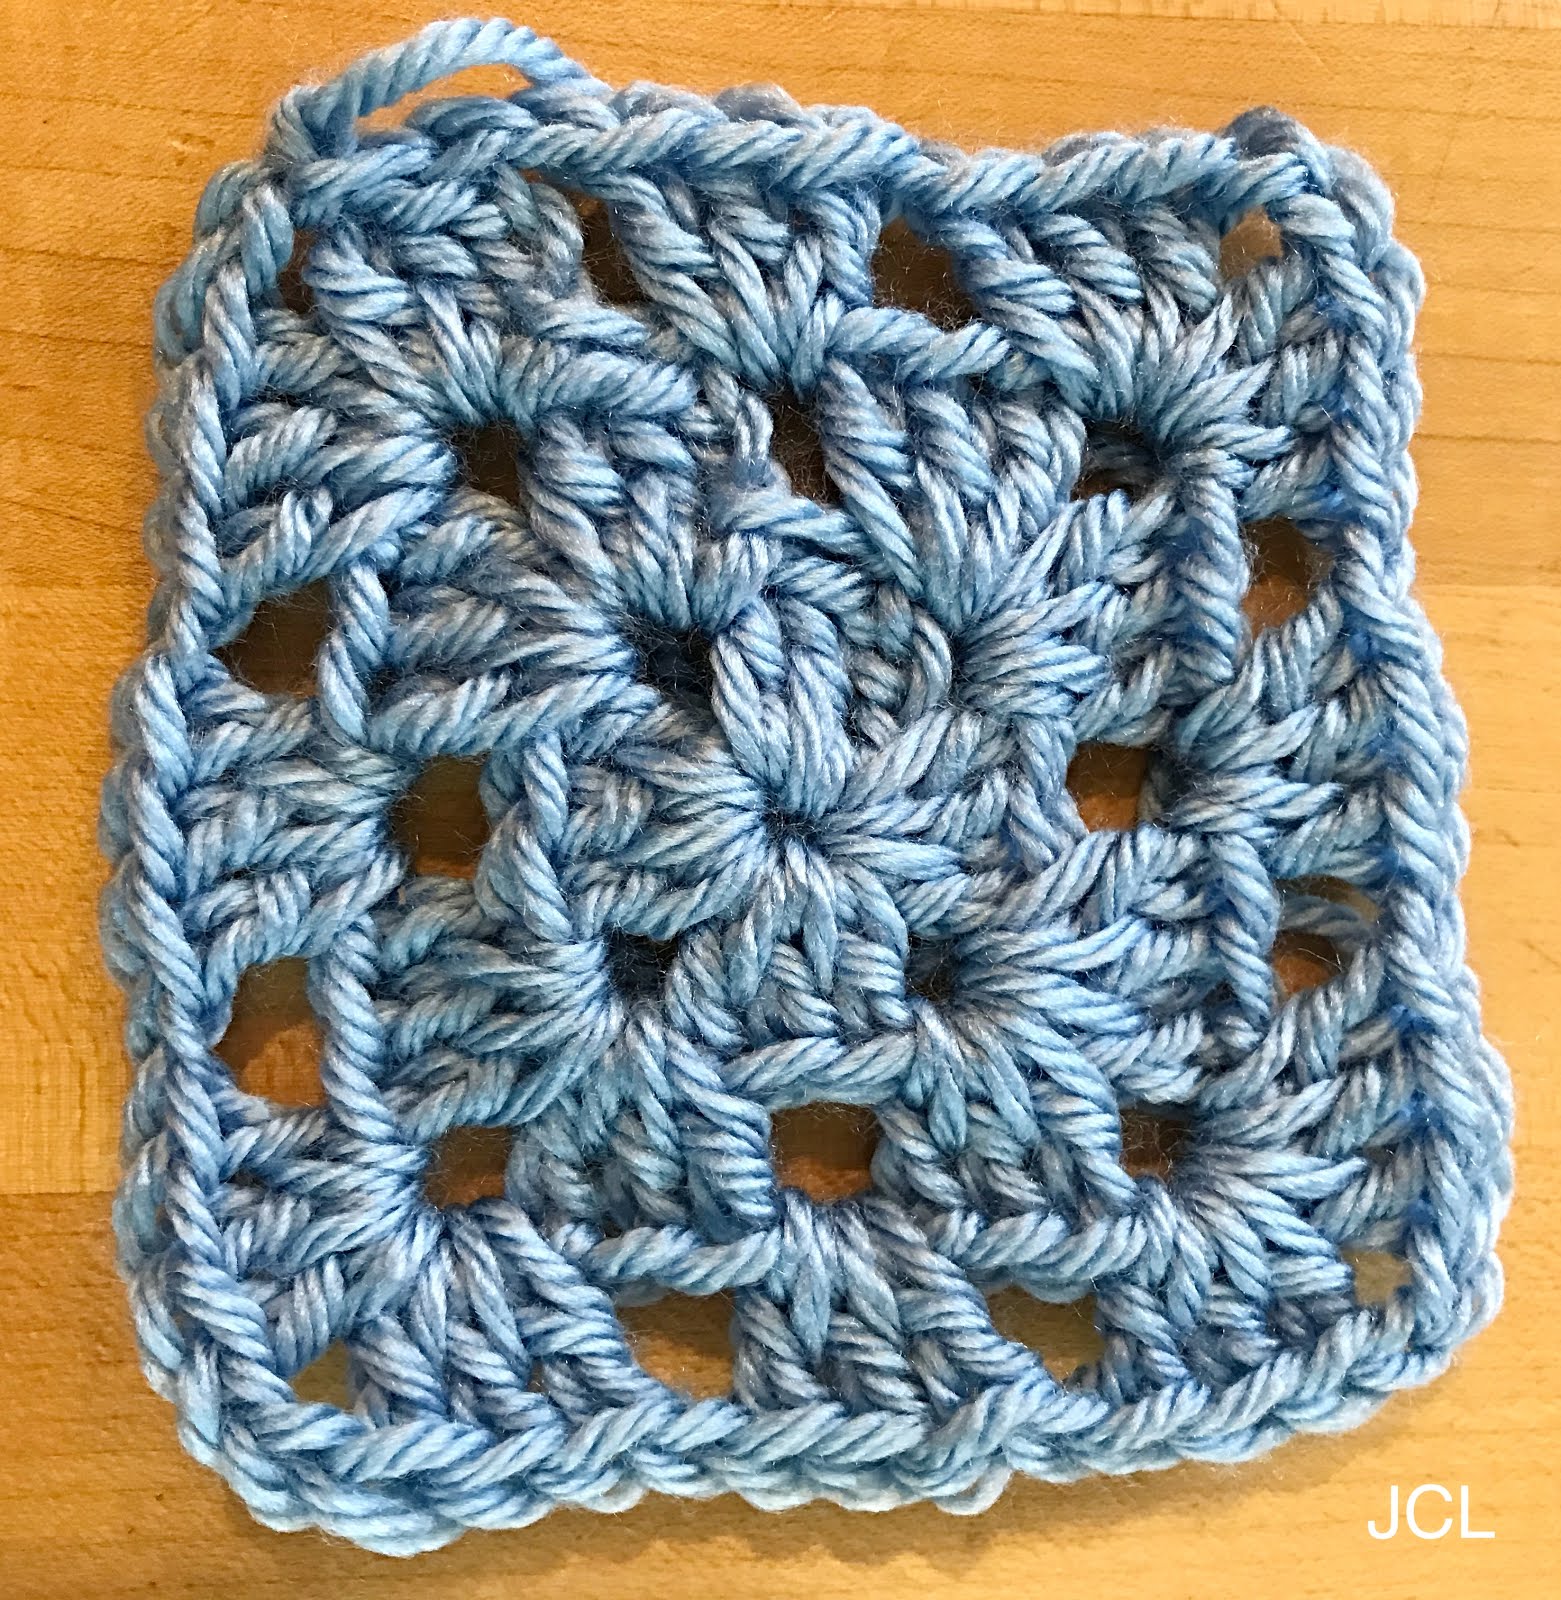 Blue Granny Square Sweater - Zeens and Roger